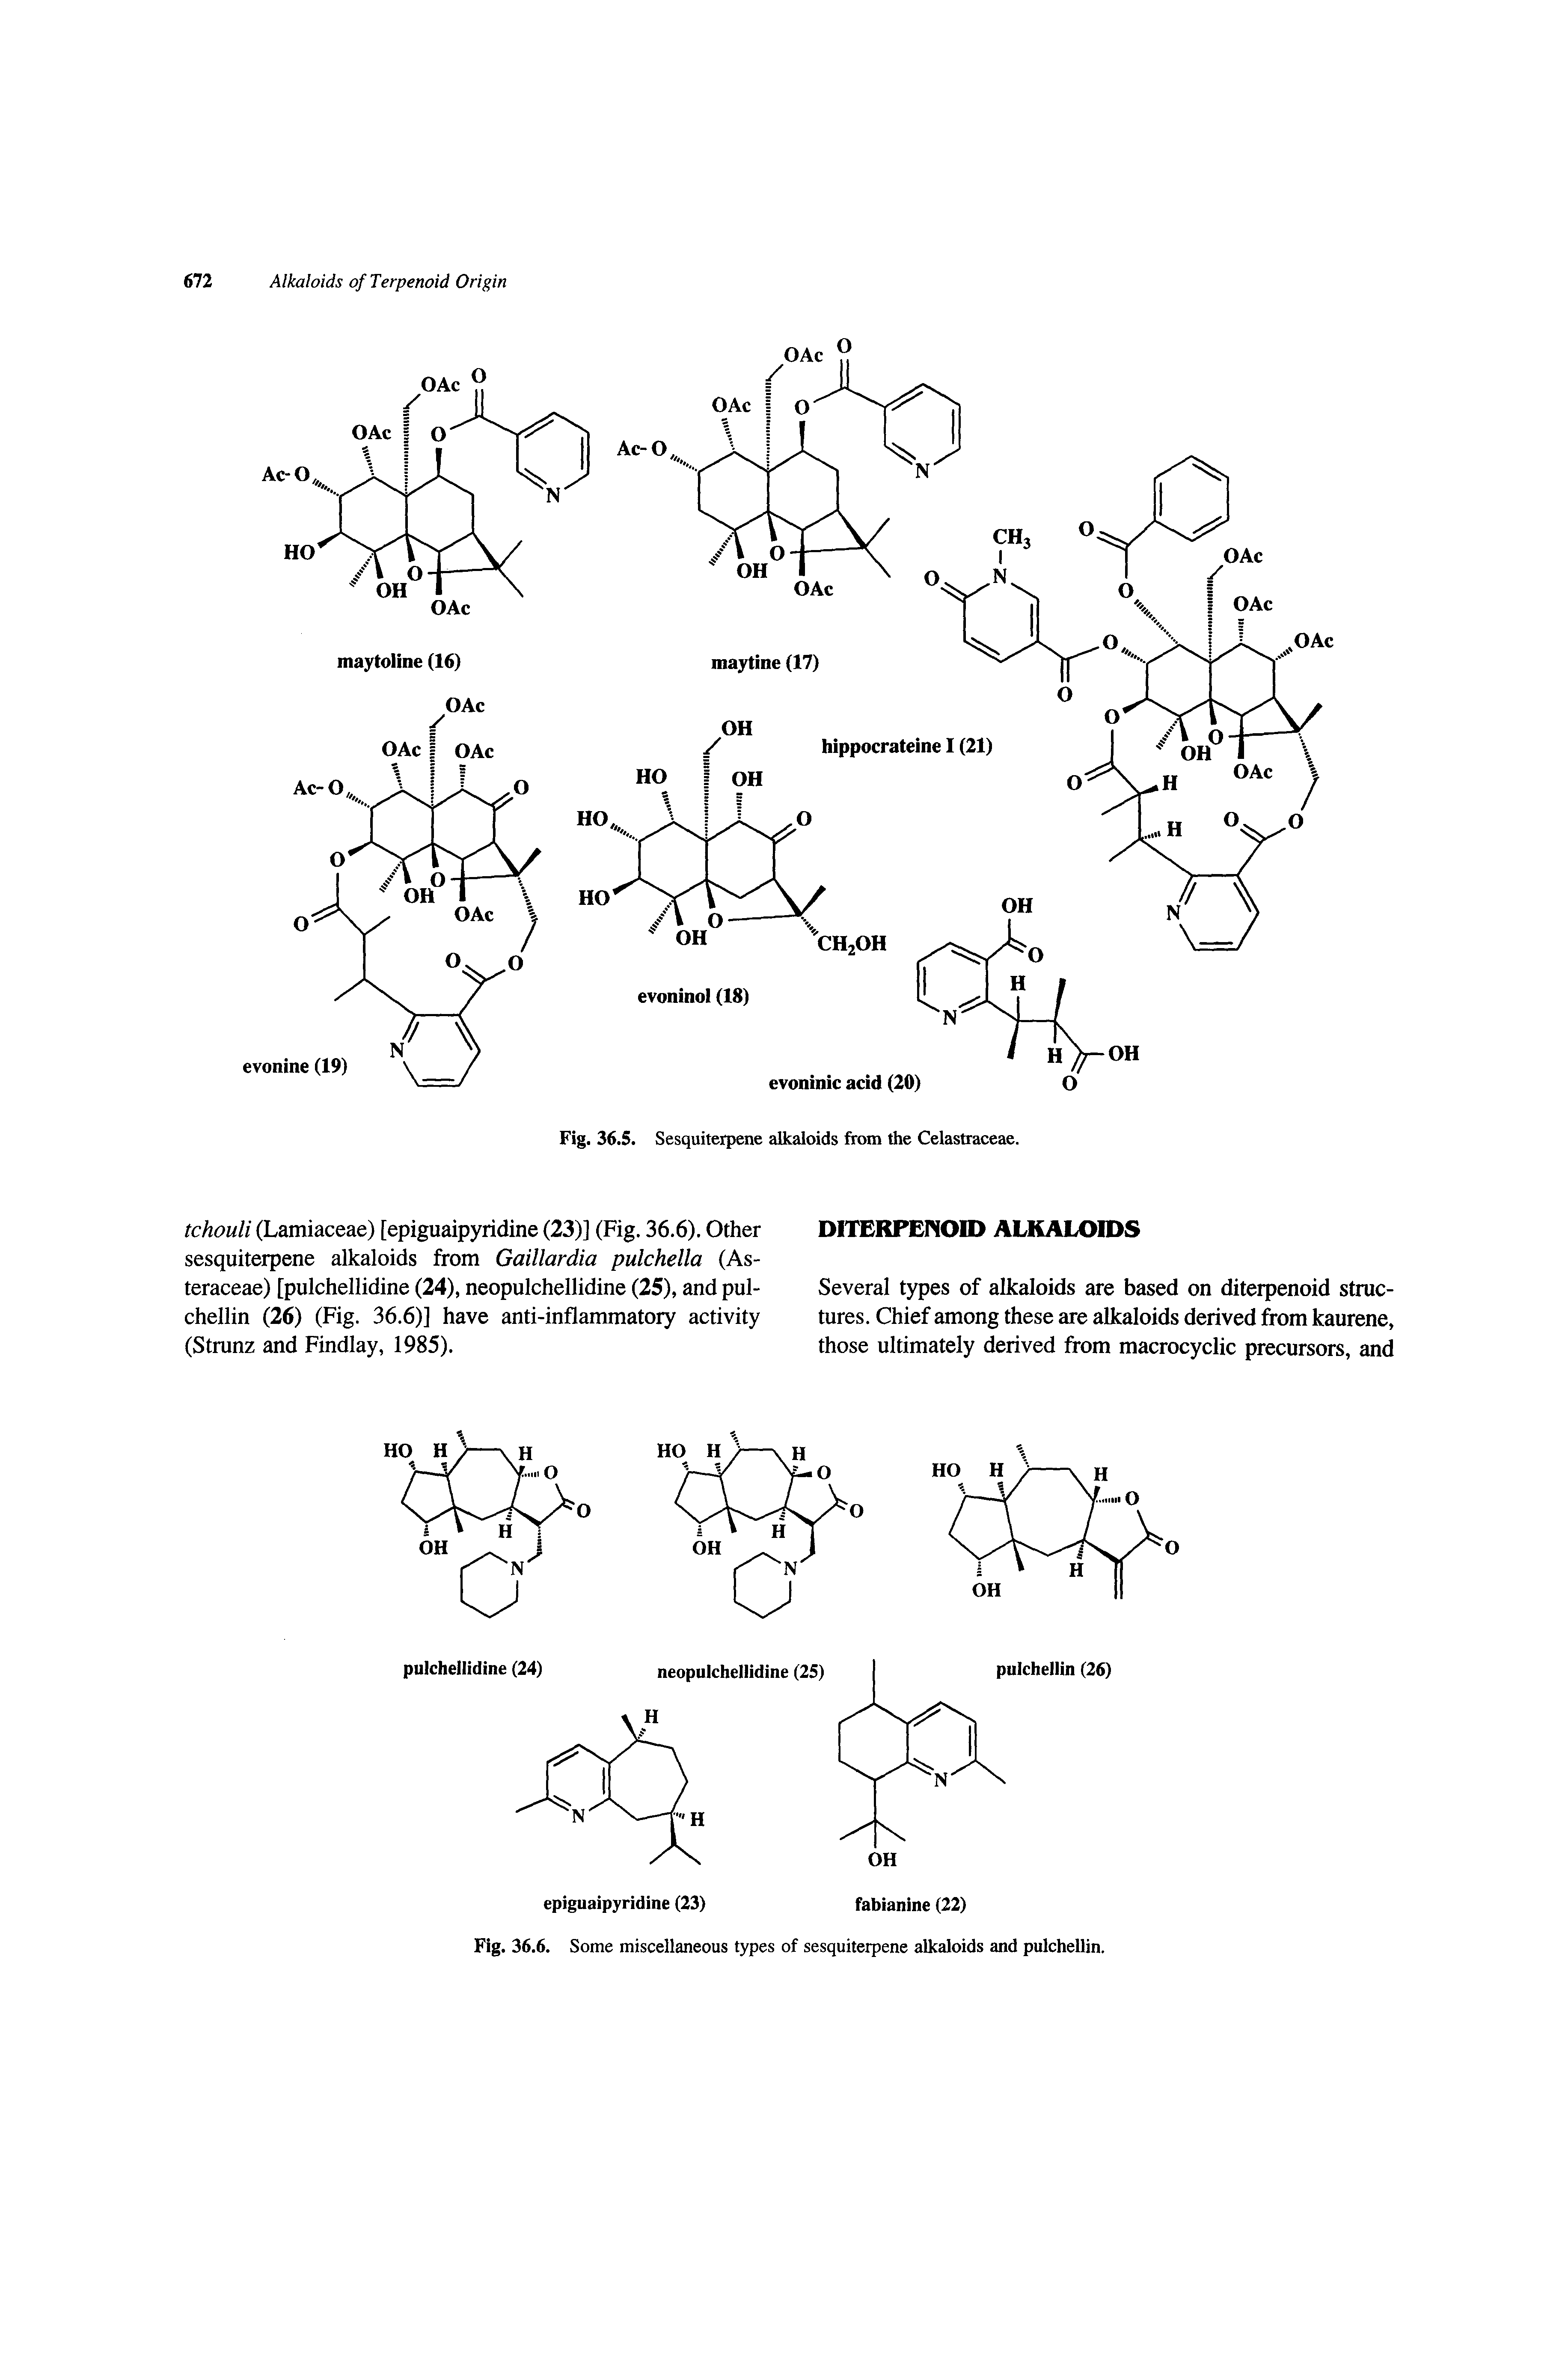 Fig. 36.6. Some miscellaneous types of sesquiterpene alkaloids and pulchellin.